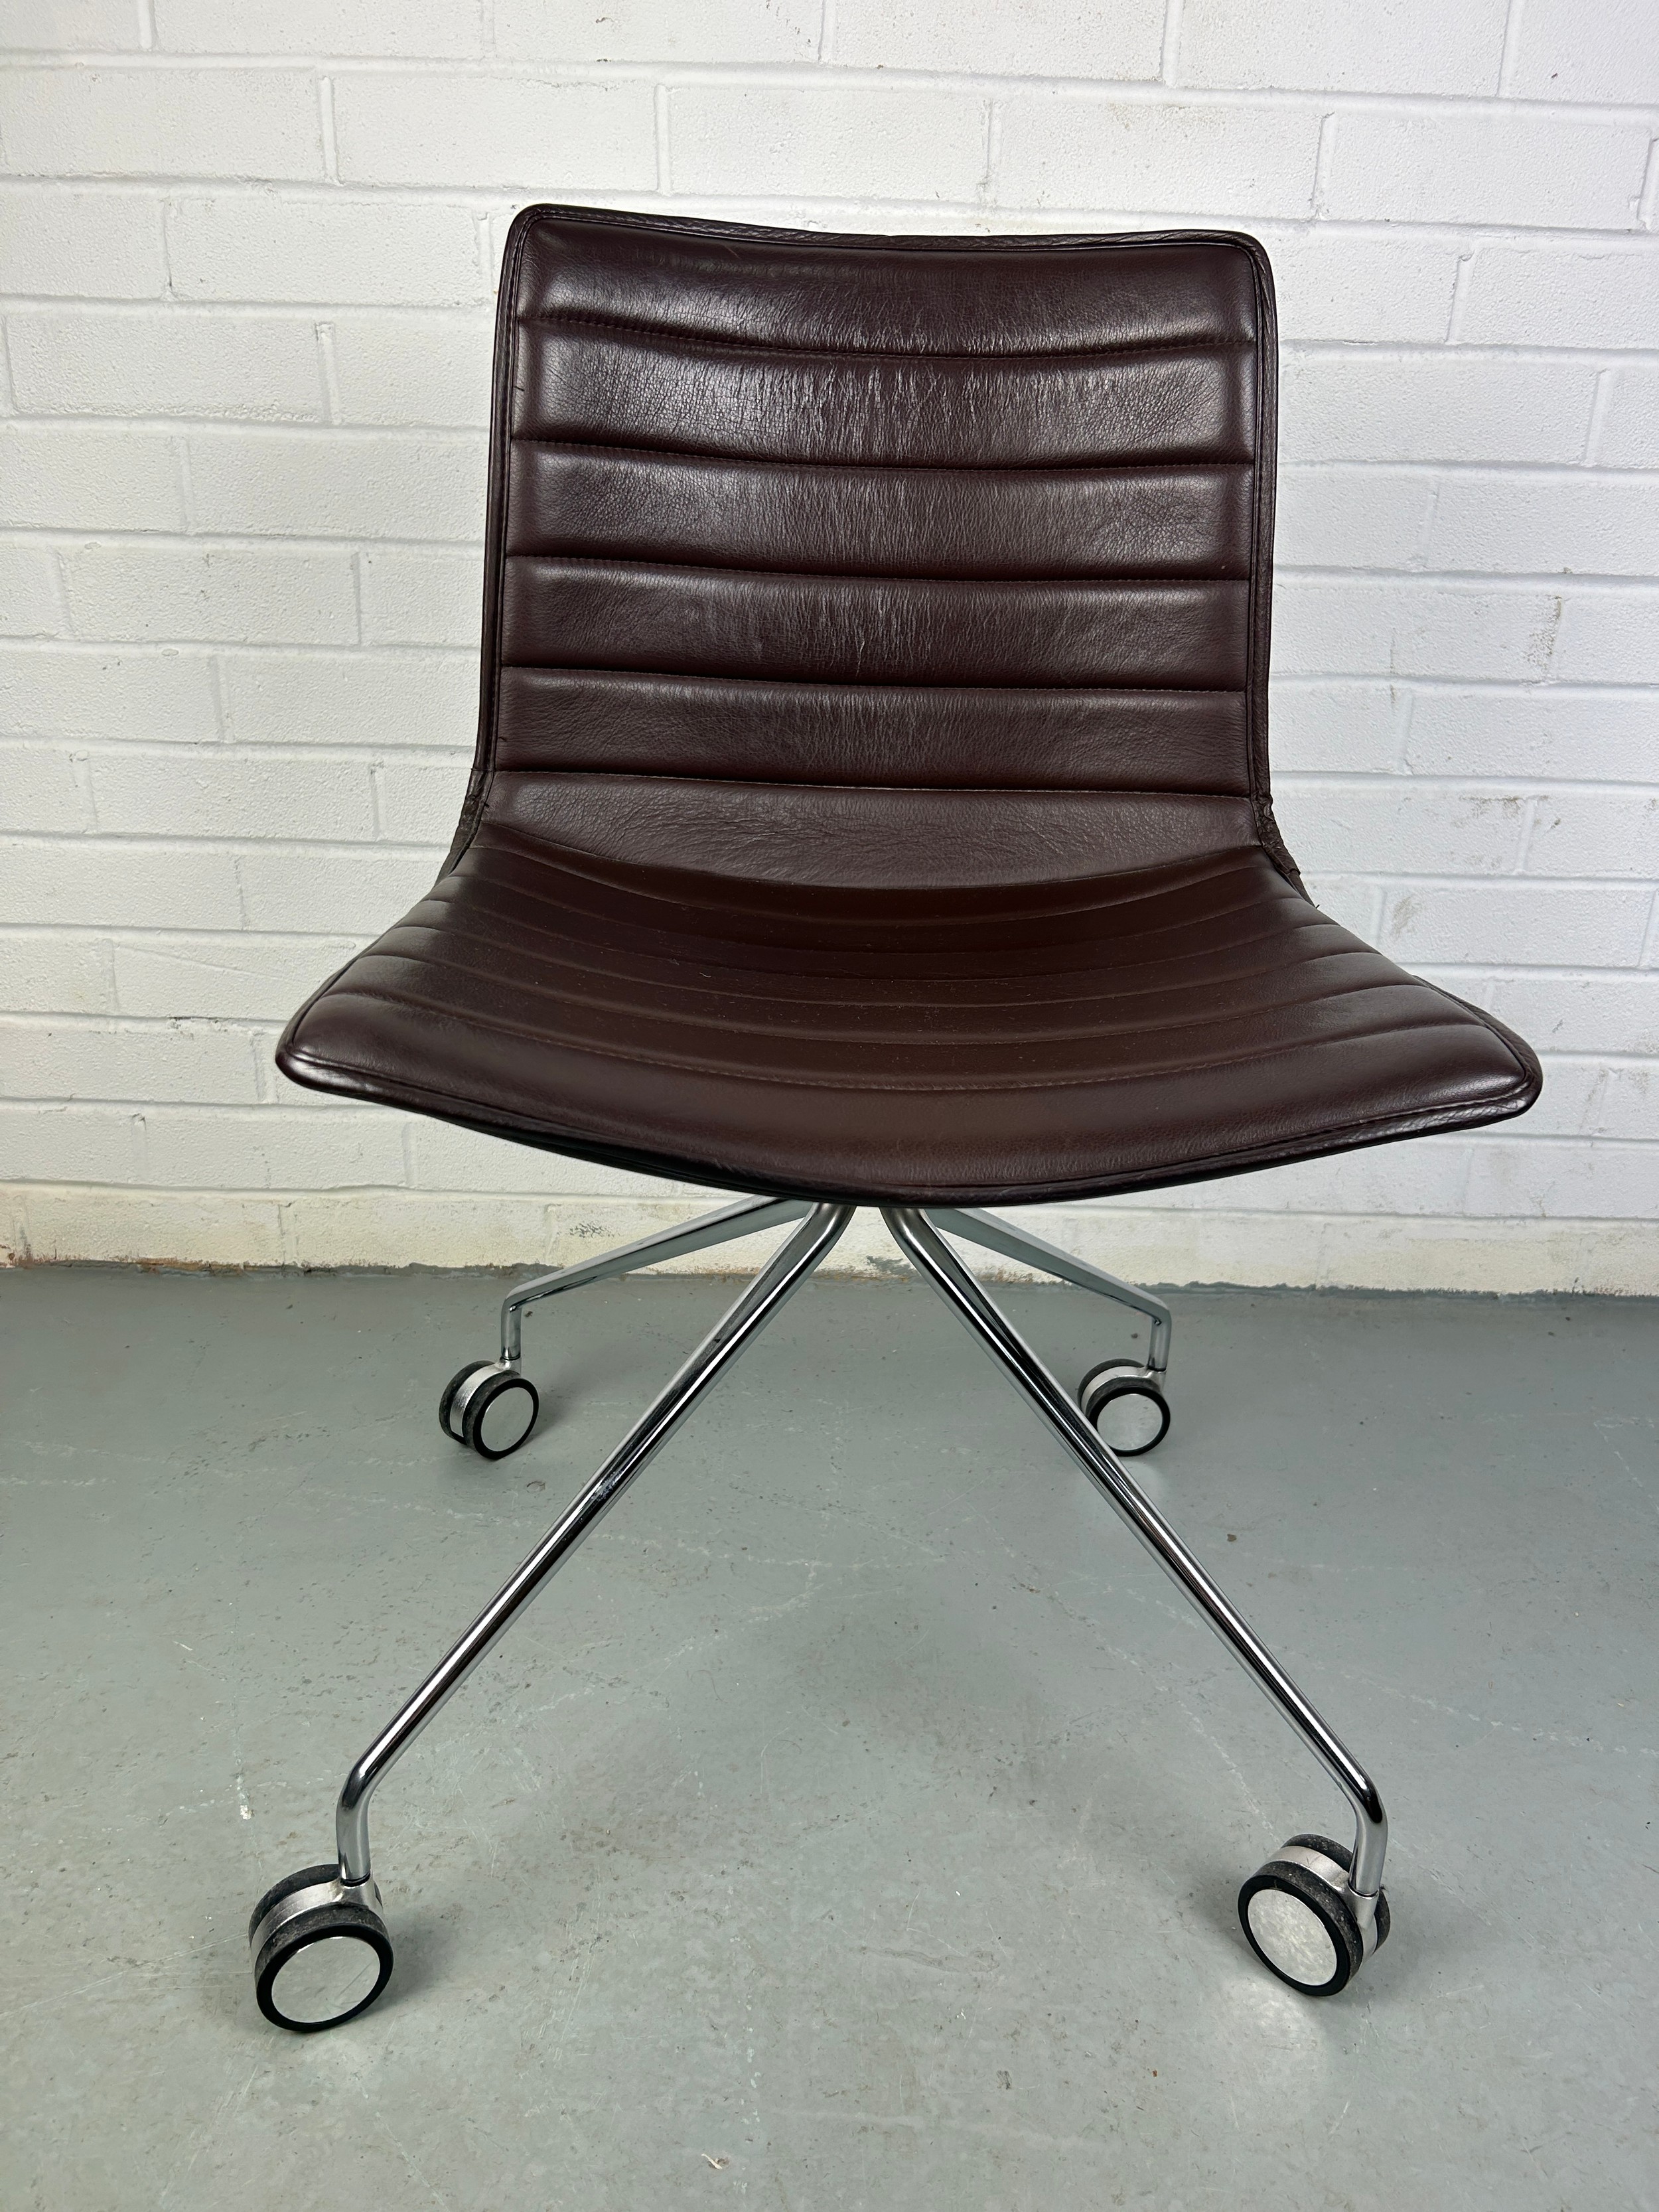 A BROWN LEATHER SWIVEL CHAIR BY ARPEL, 80cm x 47cm x 41cm - Image 3 of 4